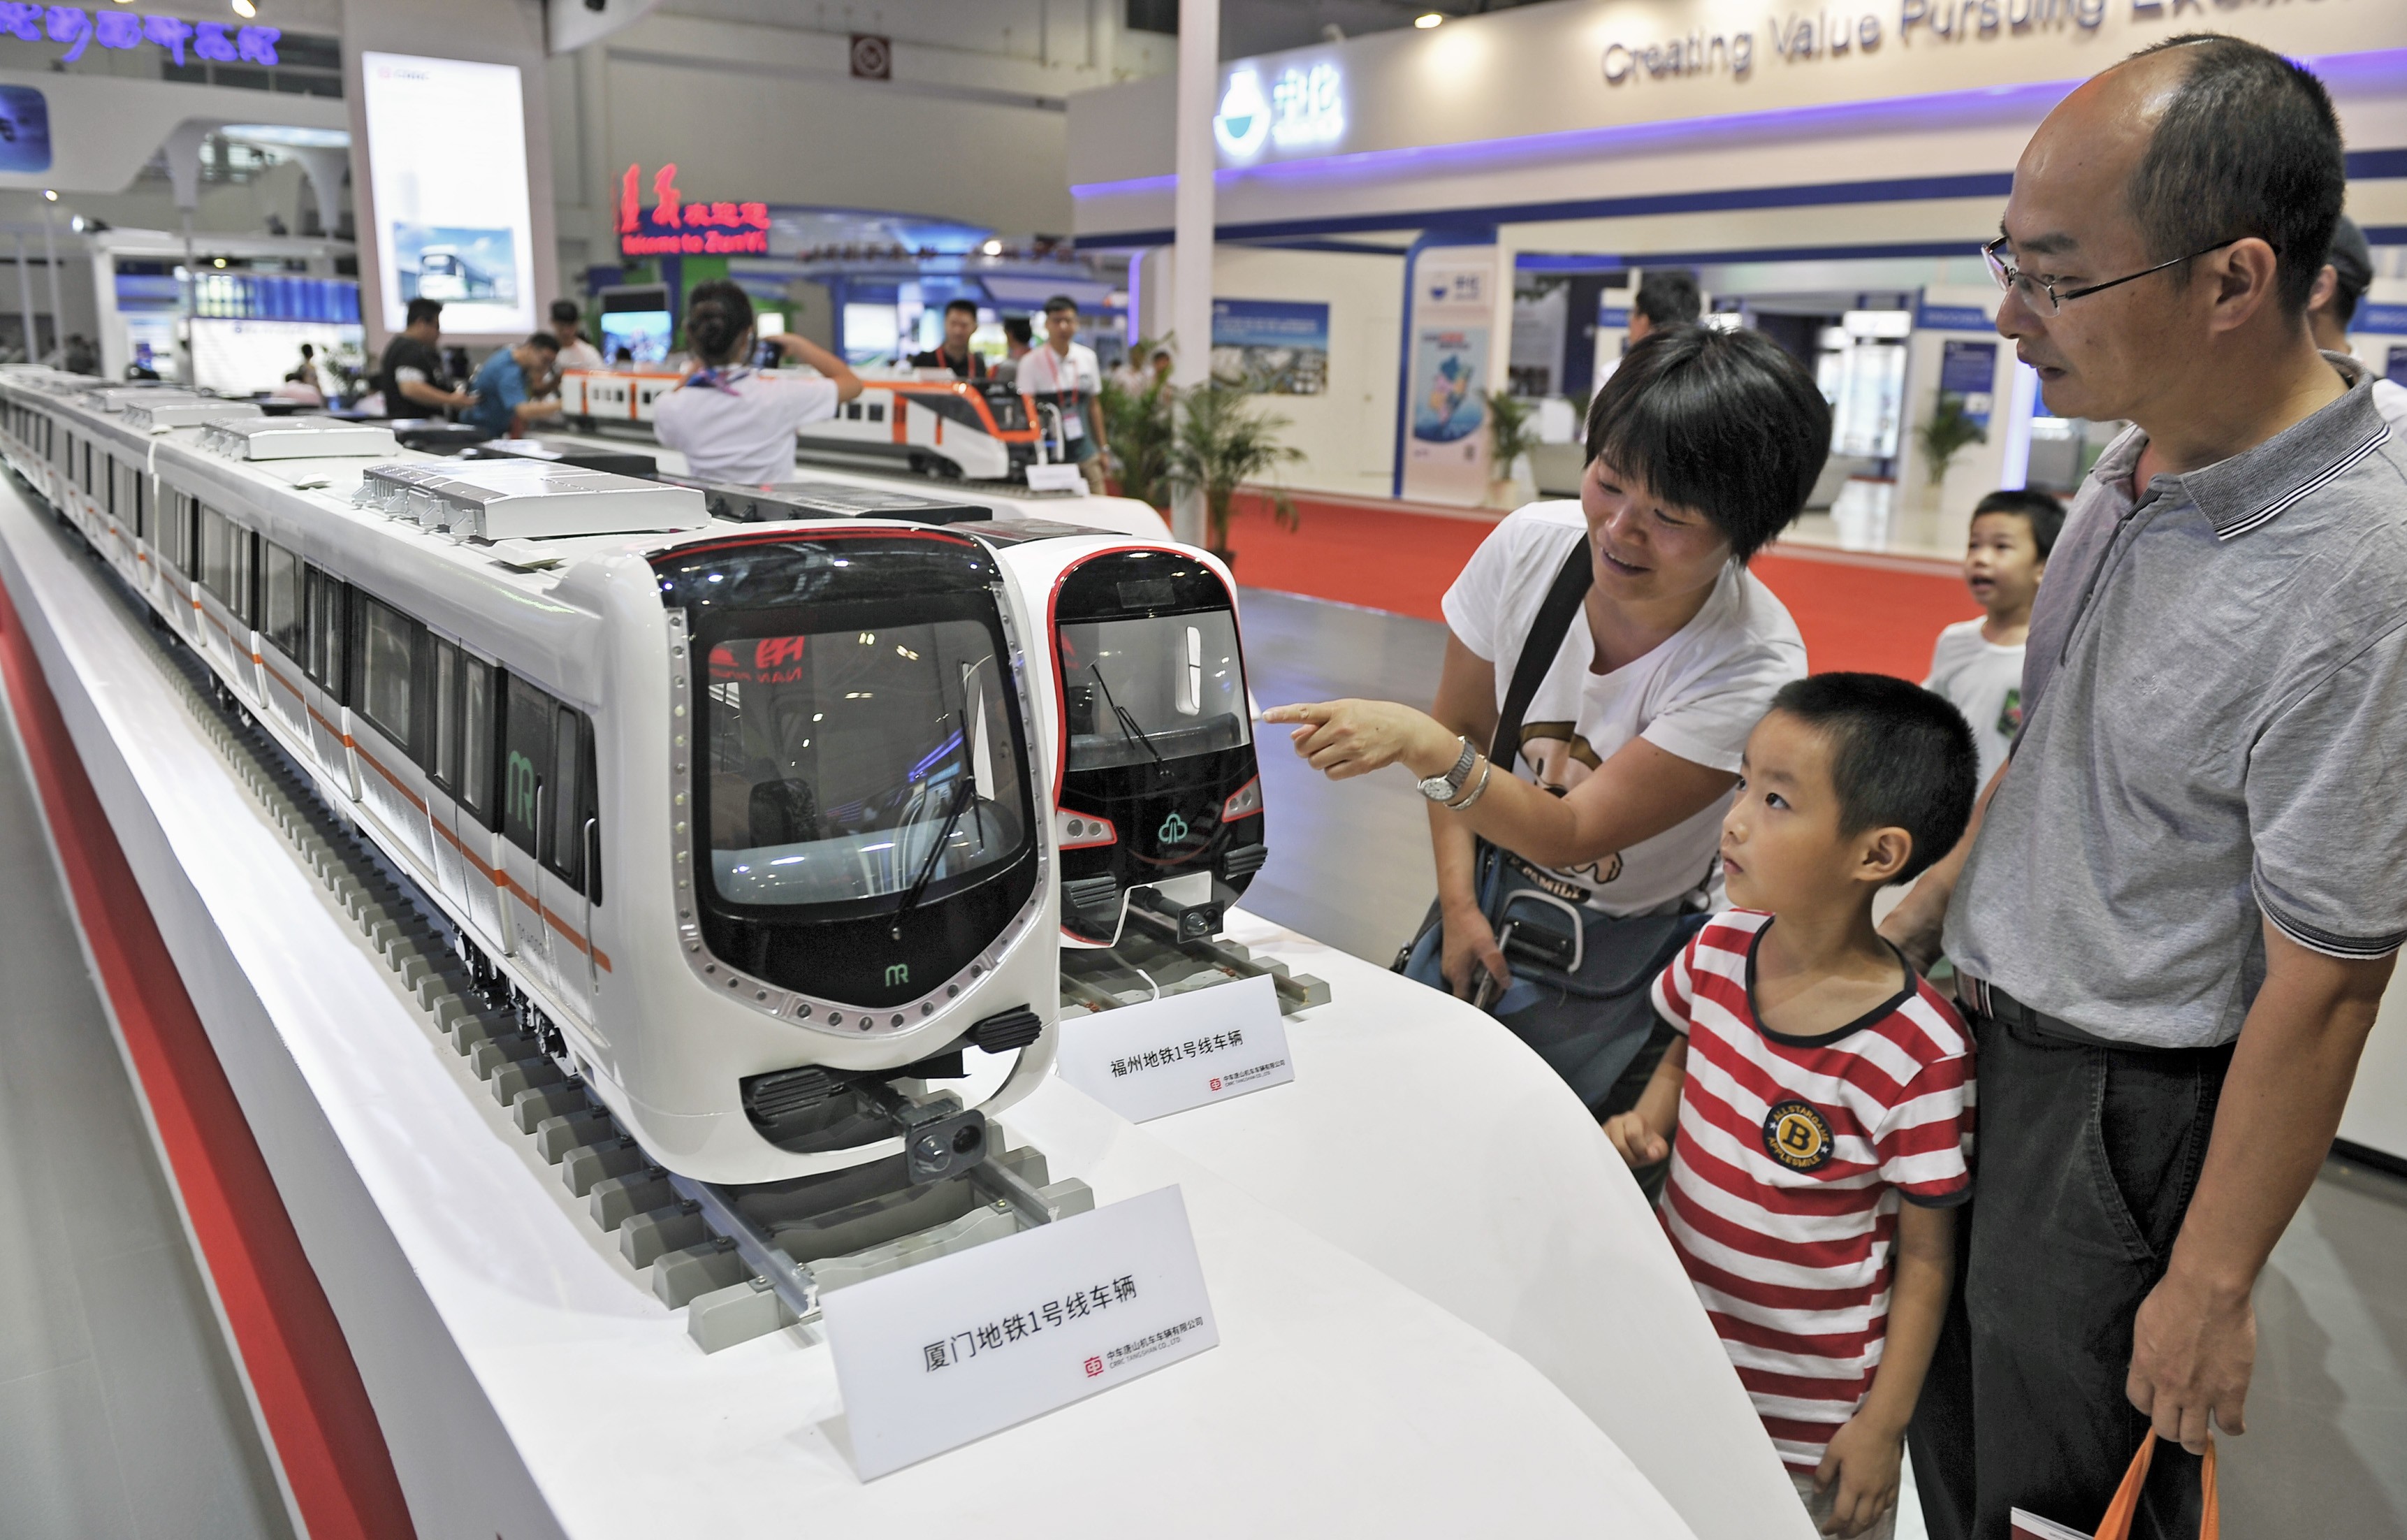 Model trains are on display before Xiamen's new subway system becomes operational in September. Photo: ImagineChina